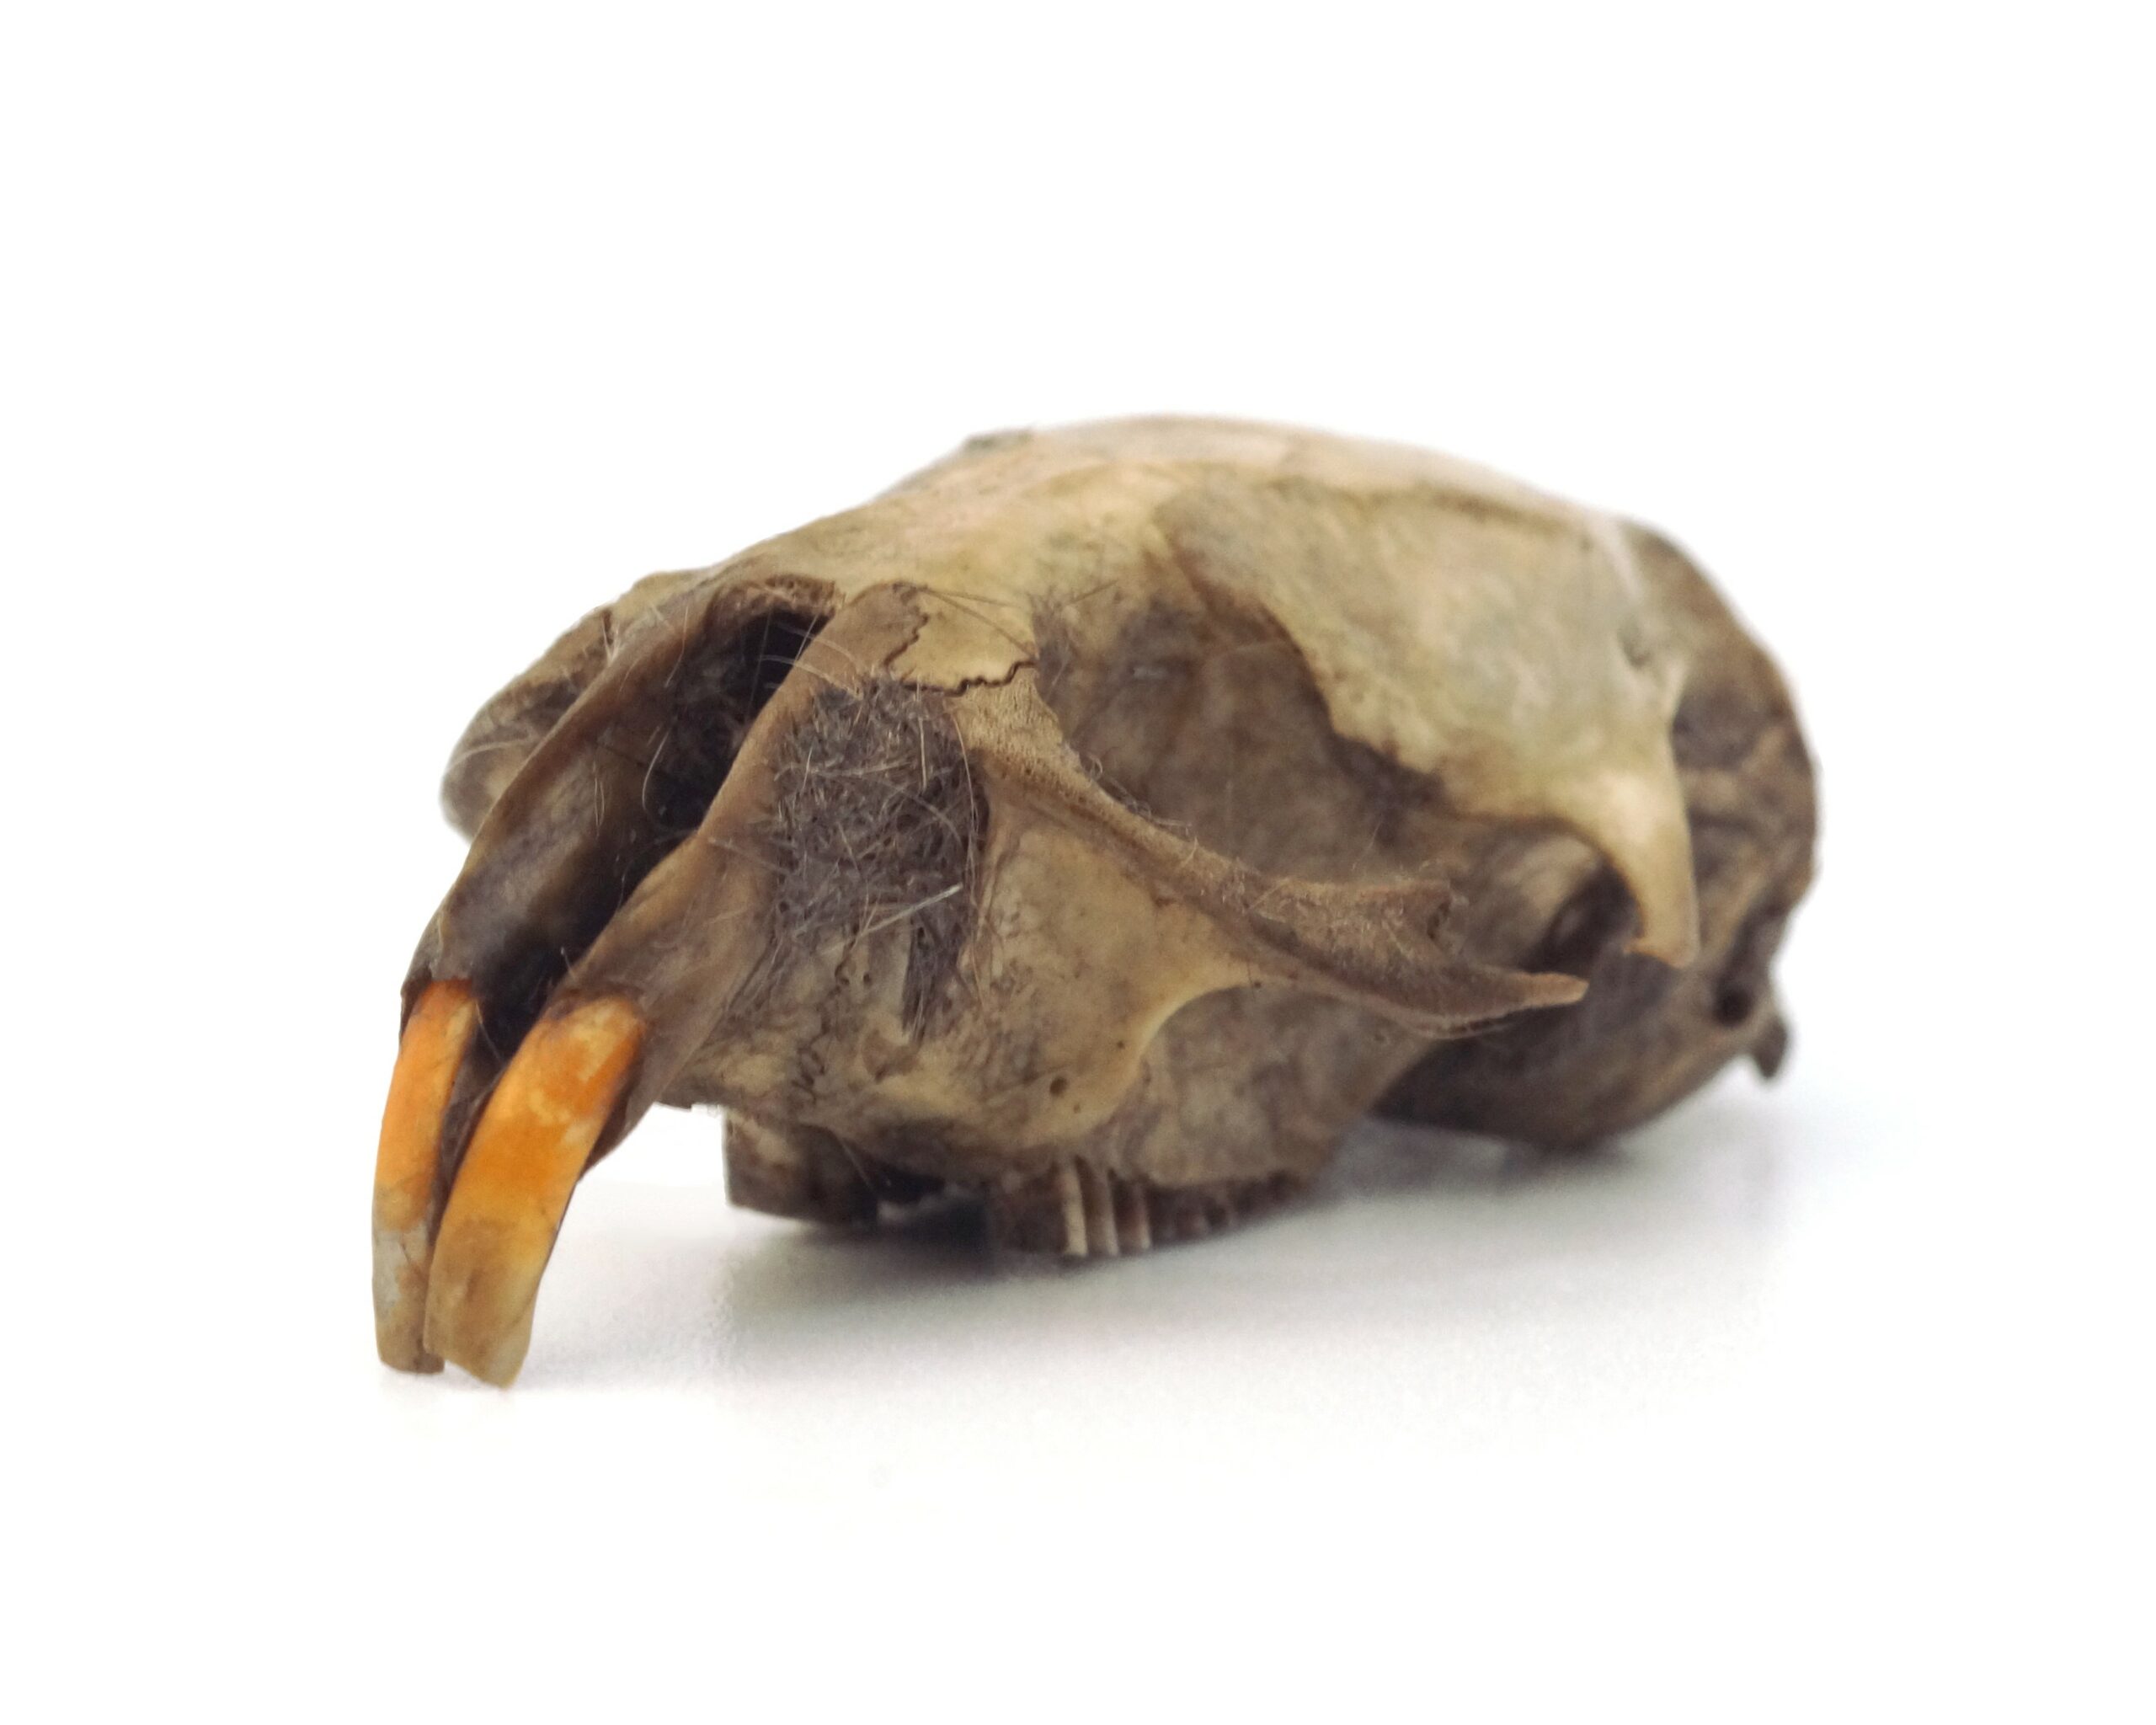 Close up of a Water Vole skull.